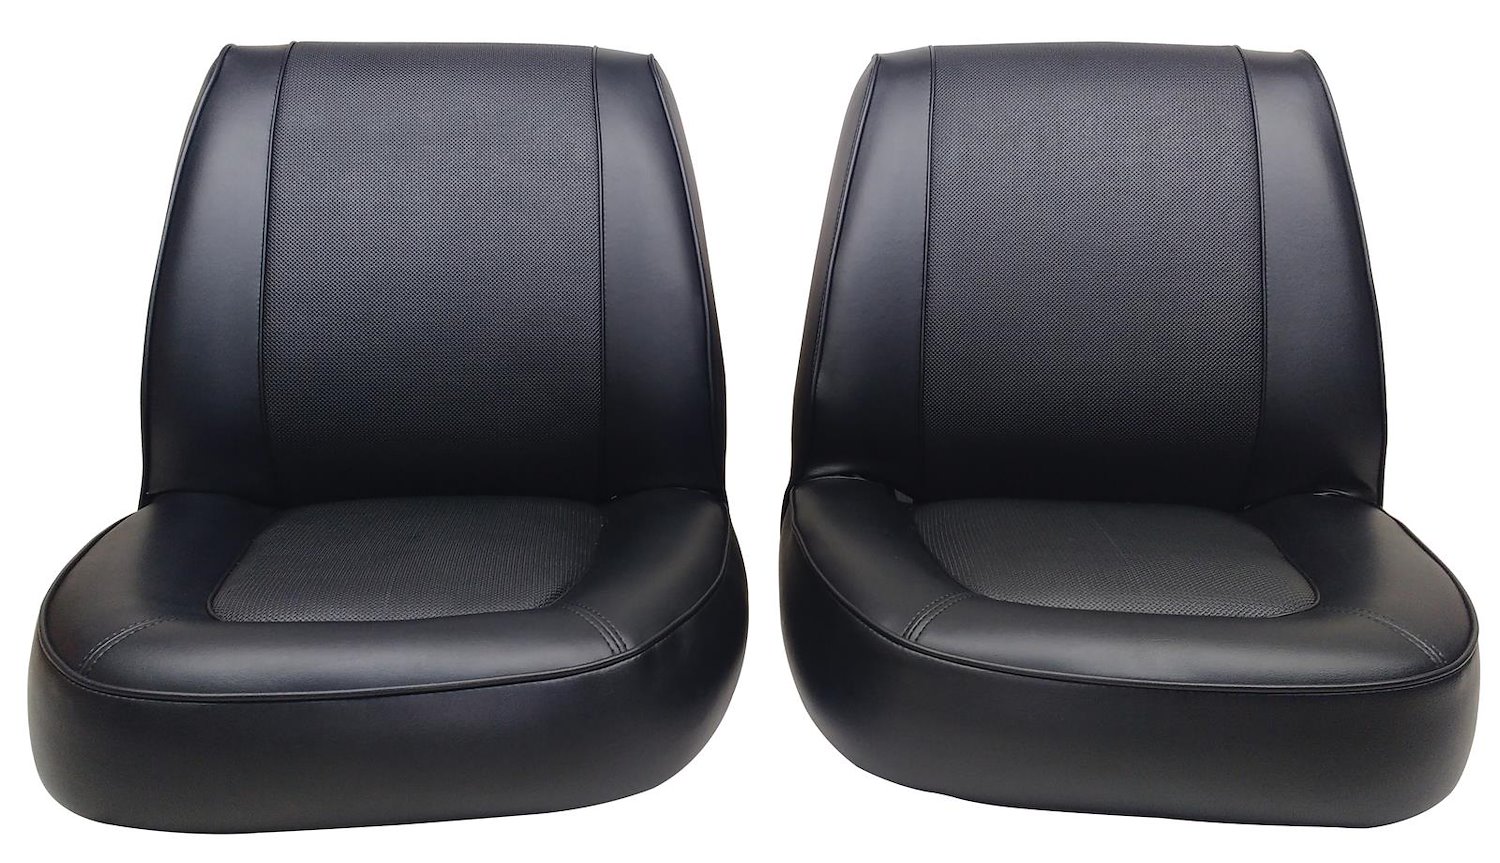 1966-1967 Ford Econoline Falcon Deluxe Club Wagon Interior Front Bucket Seat Upholstery Set for models equipped with folding and